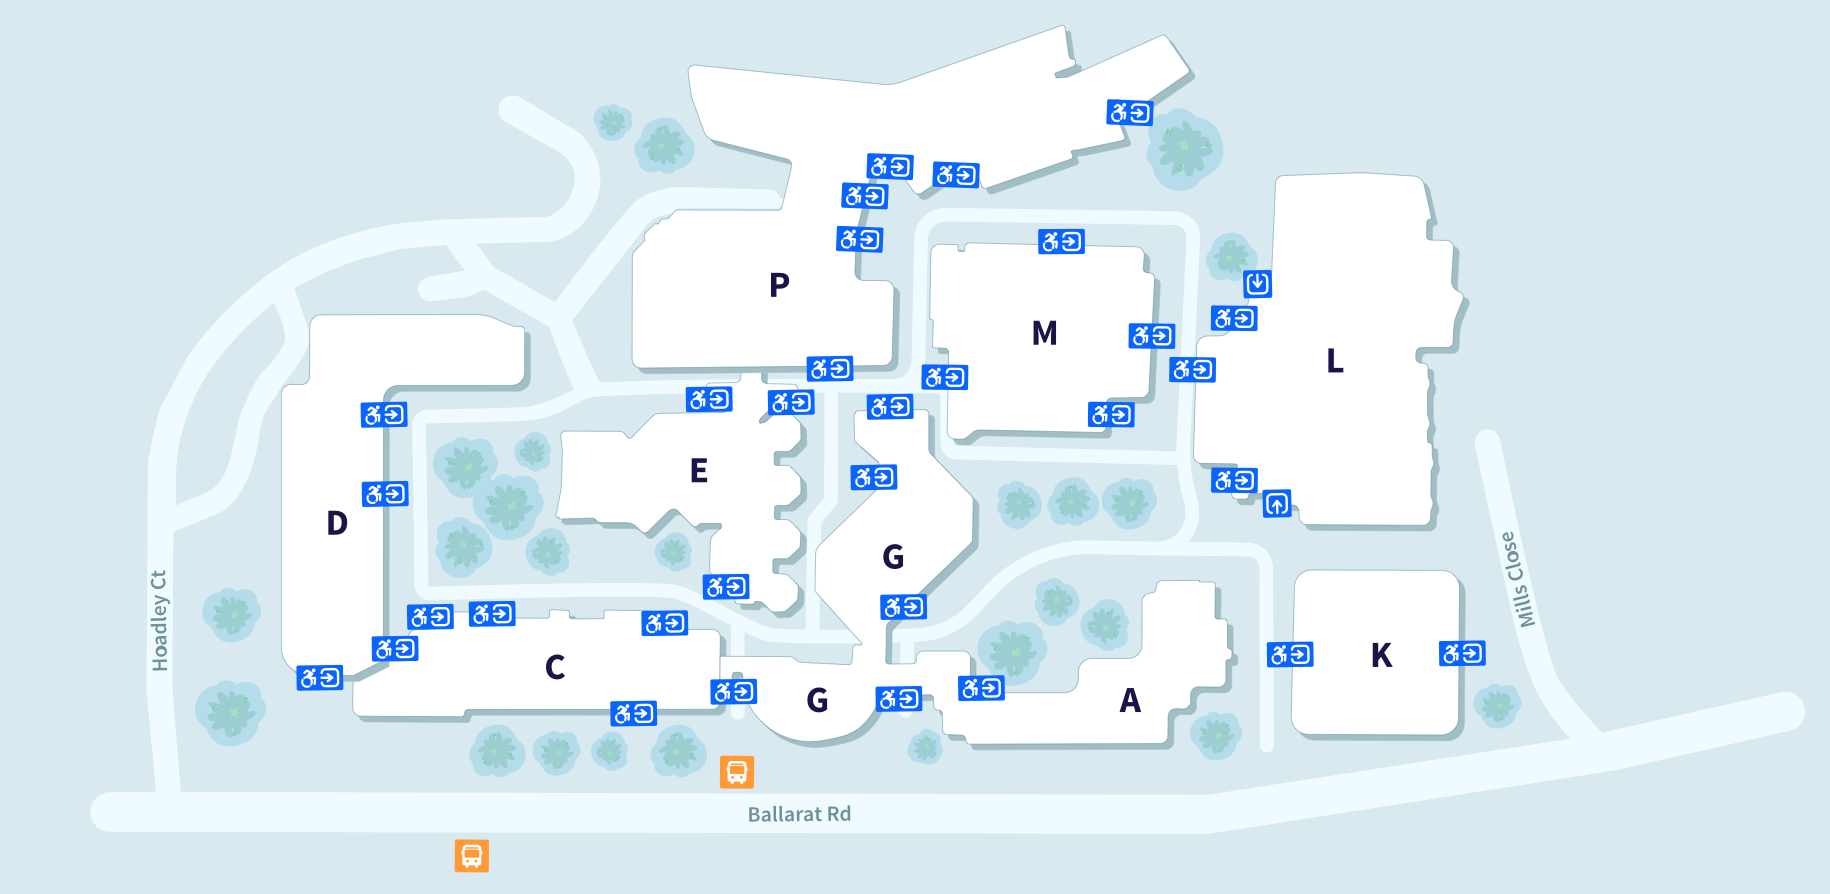 Map of VU's Footscray Park Campus showing Buildings D, C, G, E, P, M, L and K, and accessible entrances at each building.